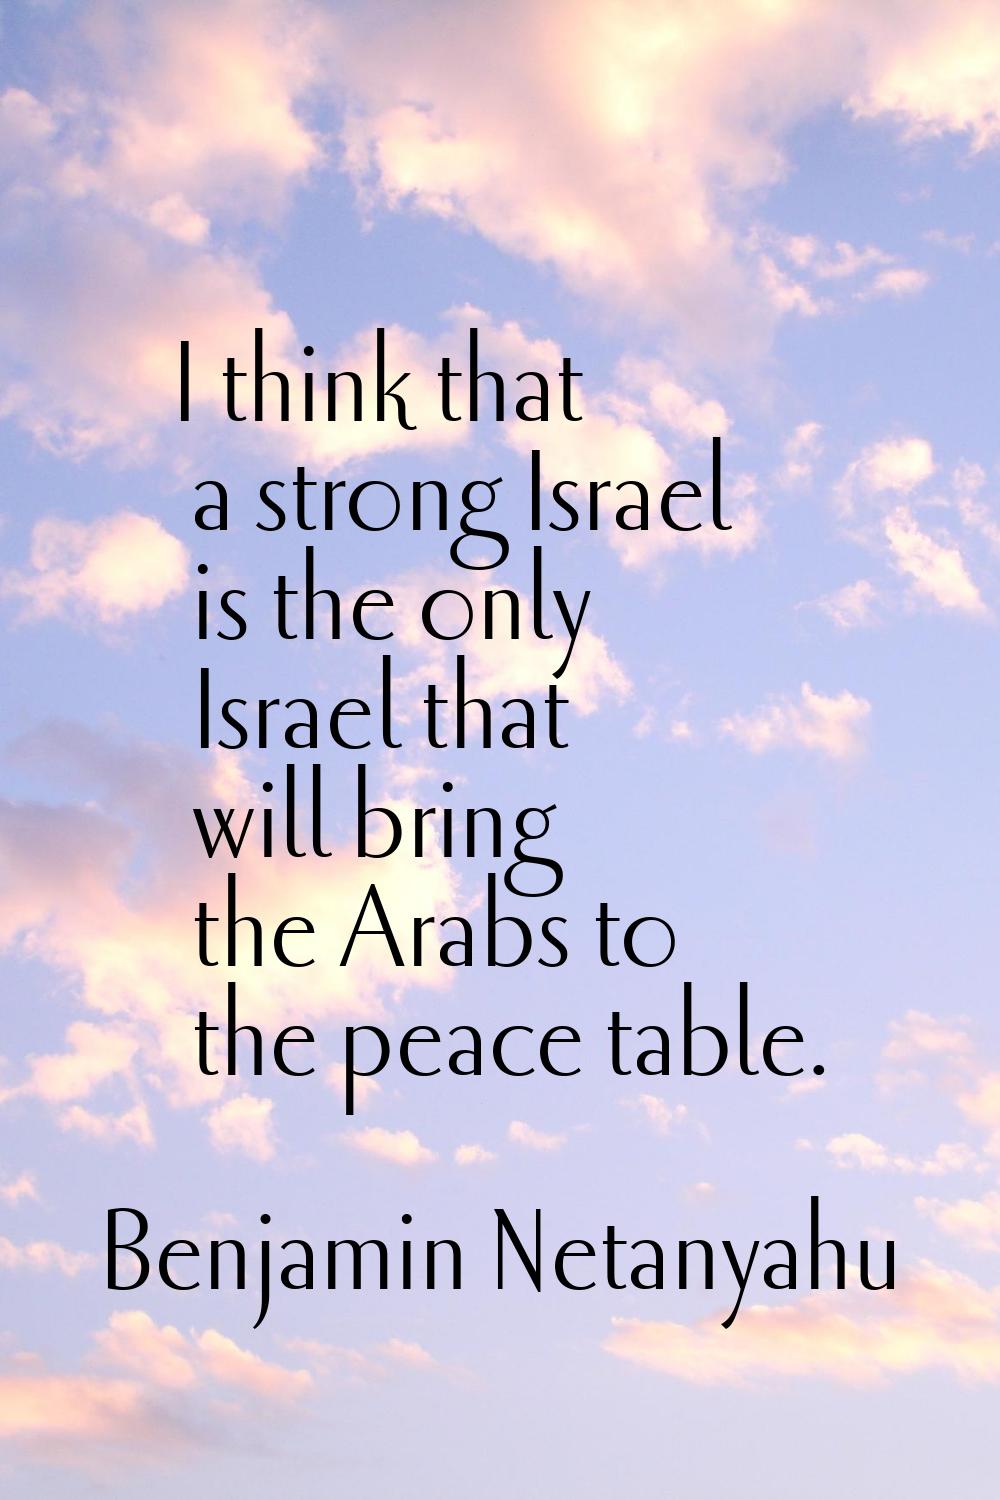 I think that a strong Israel is the only Israel that will bring the Arabs to the peace table.